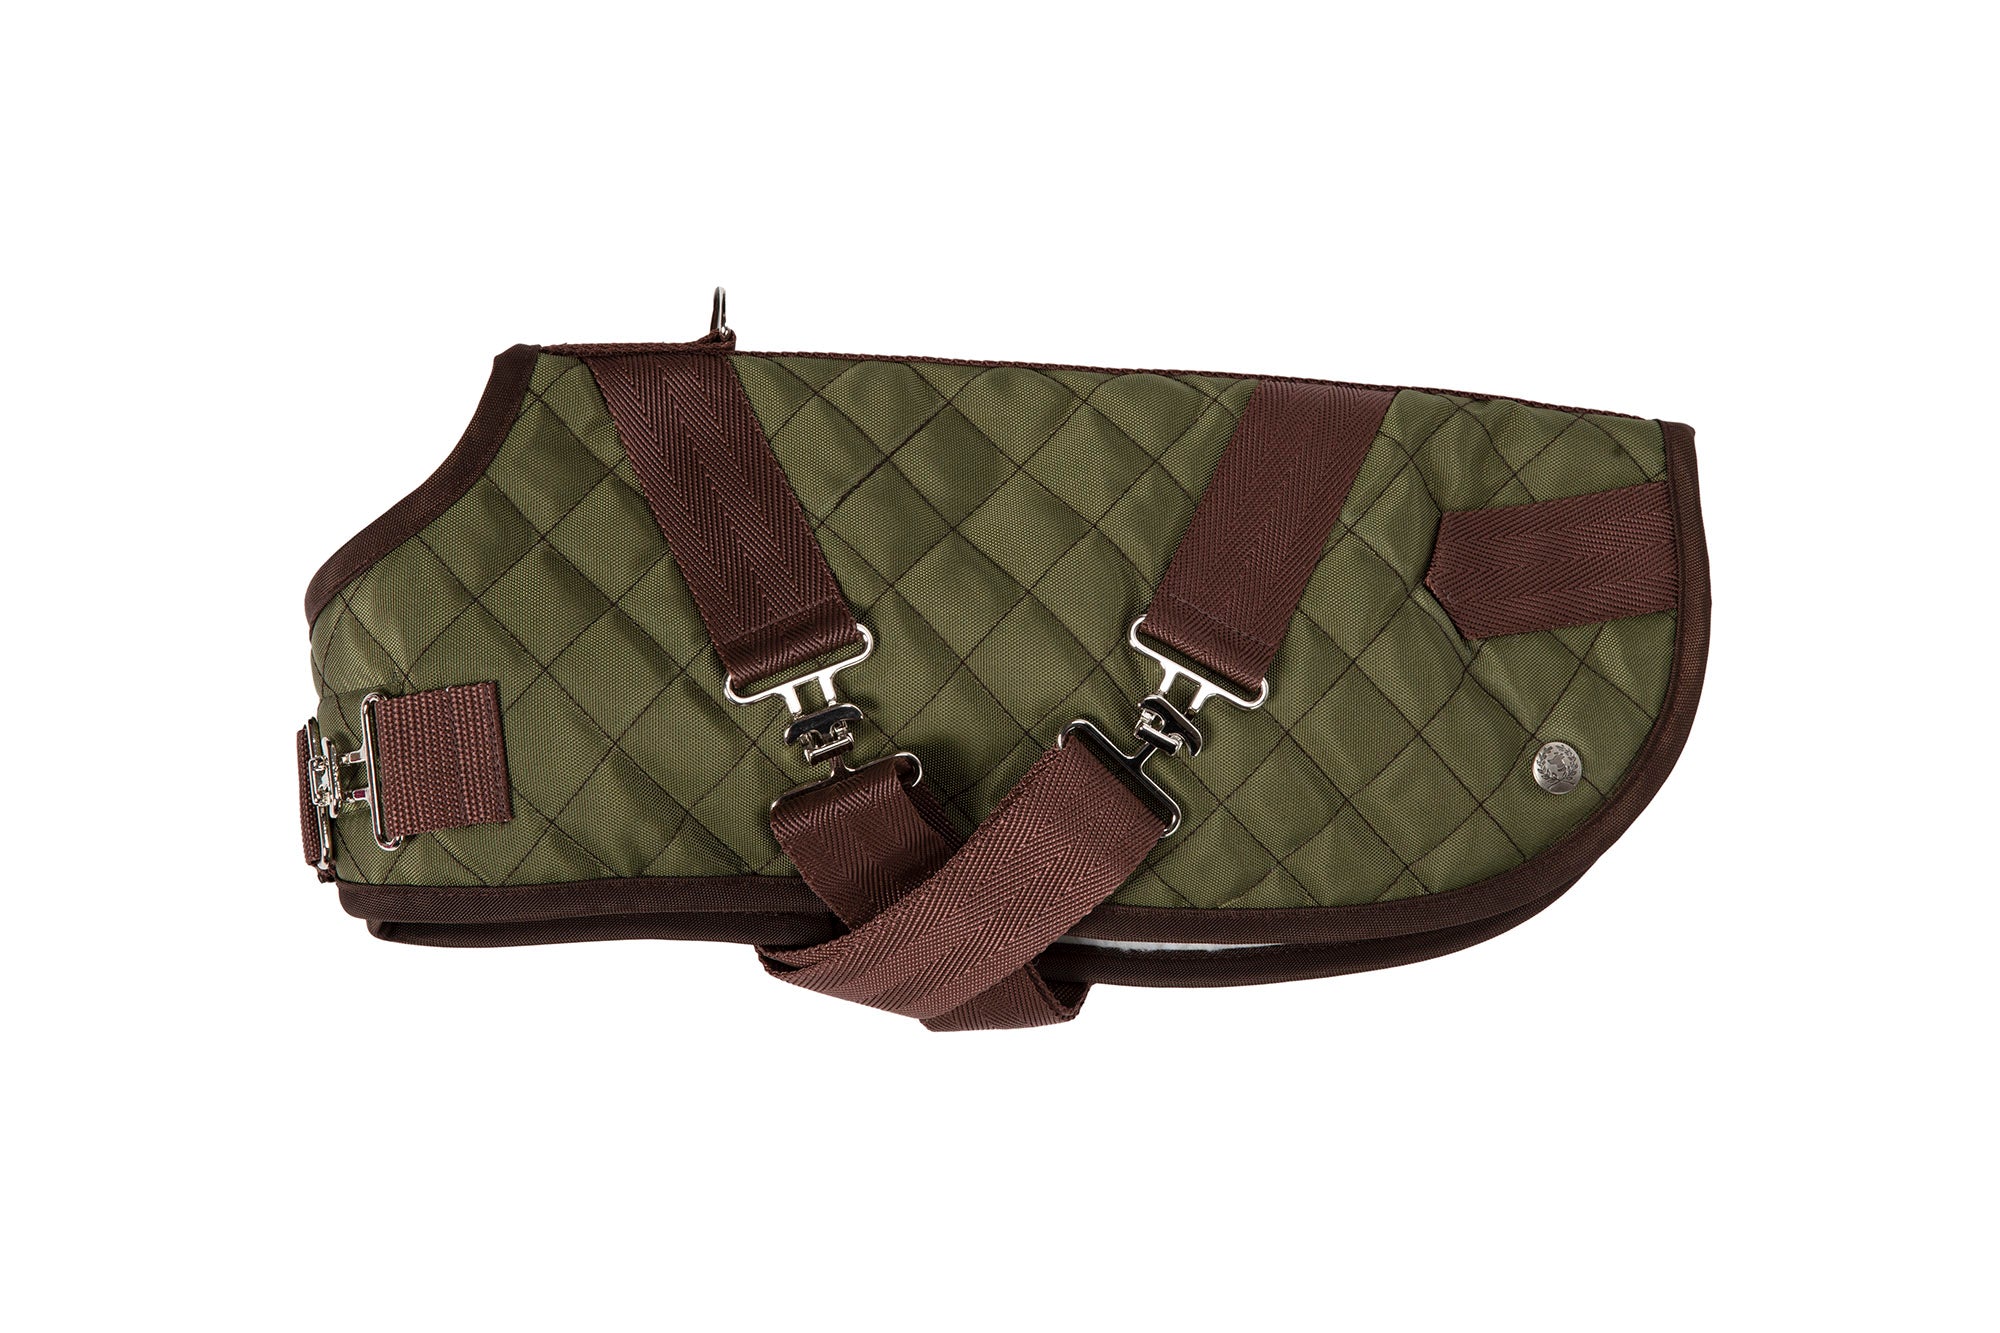 Horse Blanket - Quilted Coats - 4 Color Options - Navy, Brown, Orange & Loden